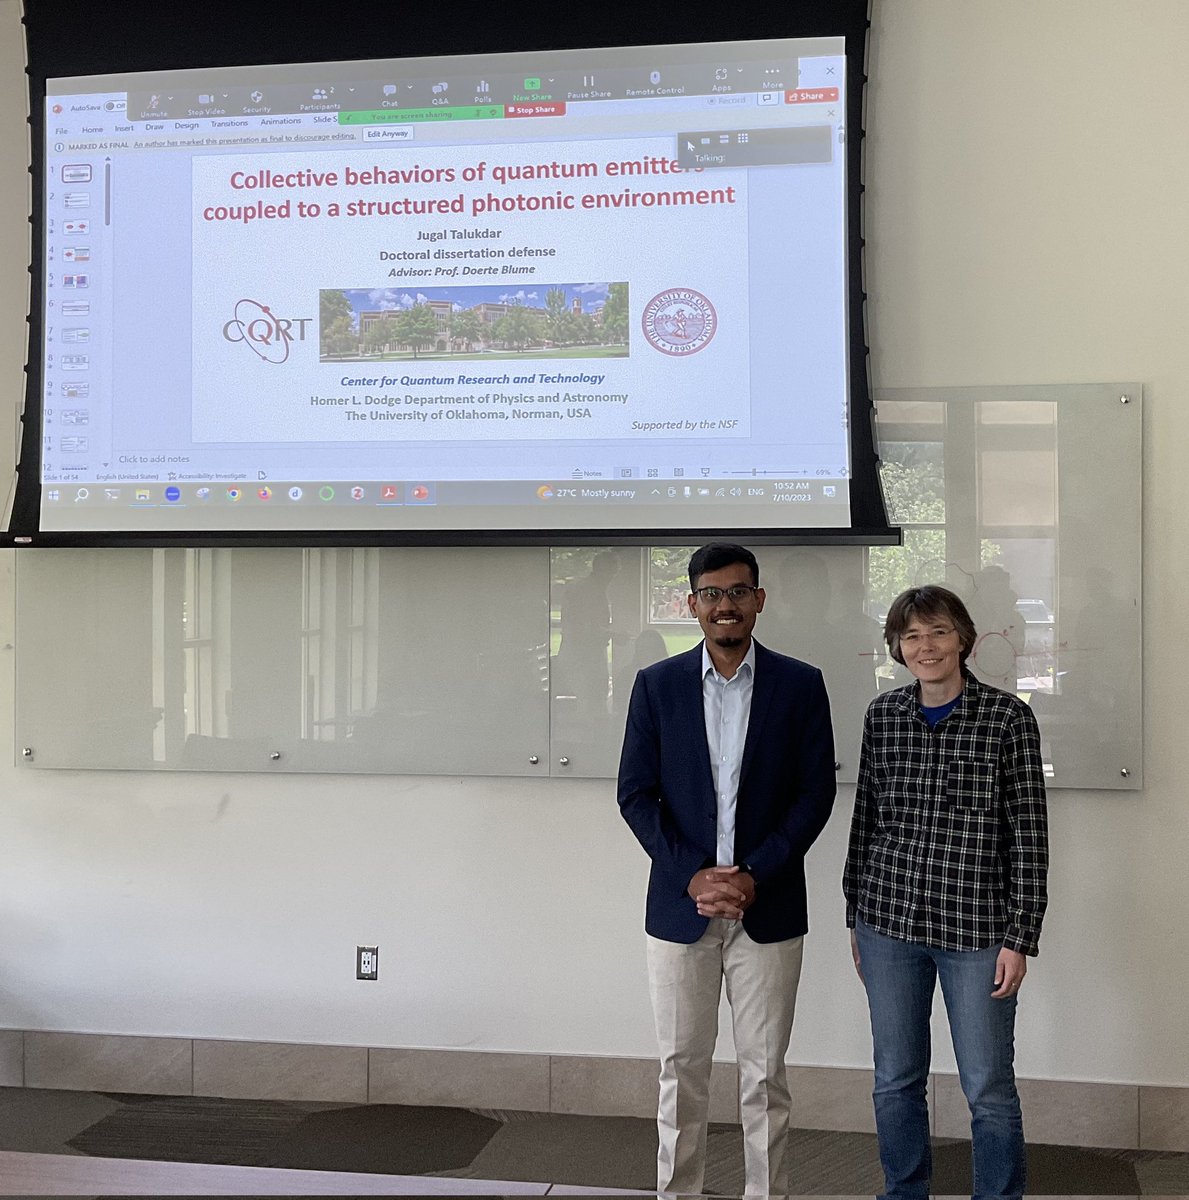 #DoctoralDegree
I am thrilled to announce that I successfully defended my doctoral dissertation, titled 'Collective behaviors of quantum emitters coupled to a structured photonic environment,' on July 10th at @CQRTatOU.